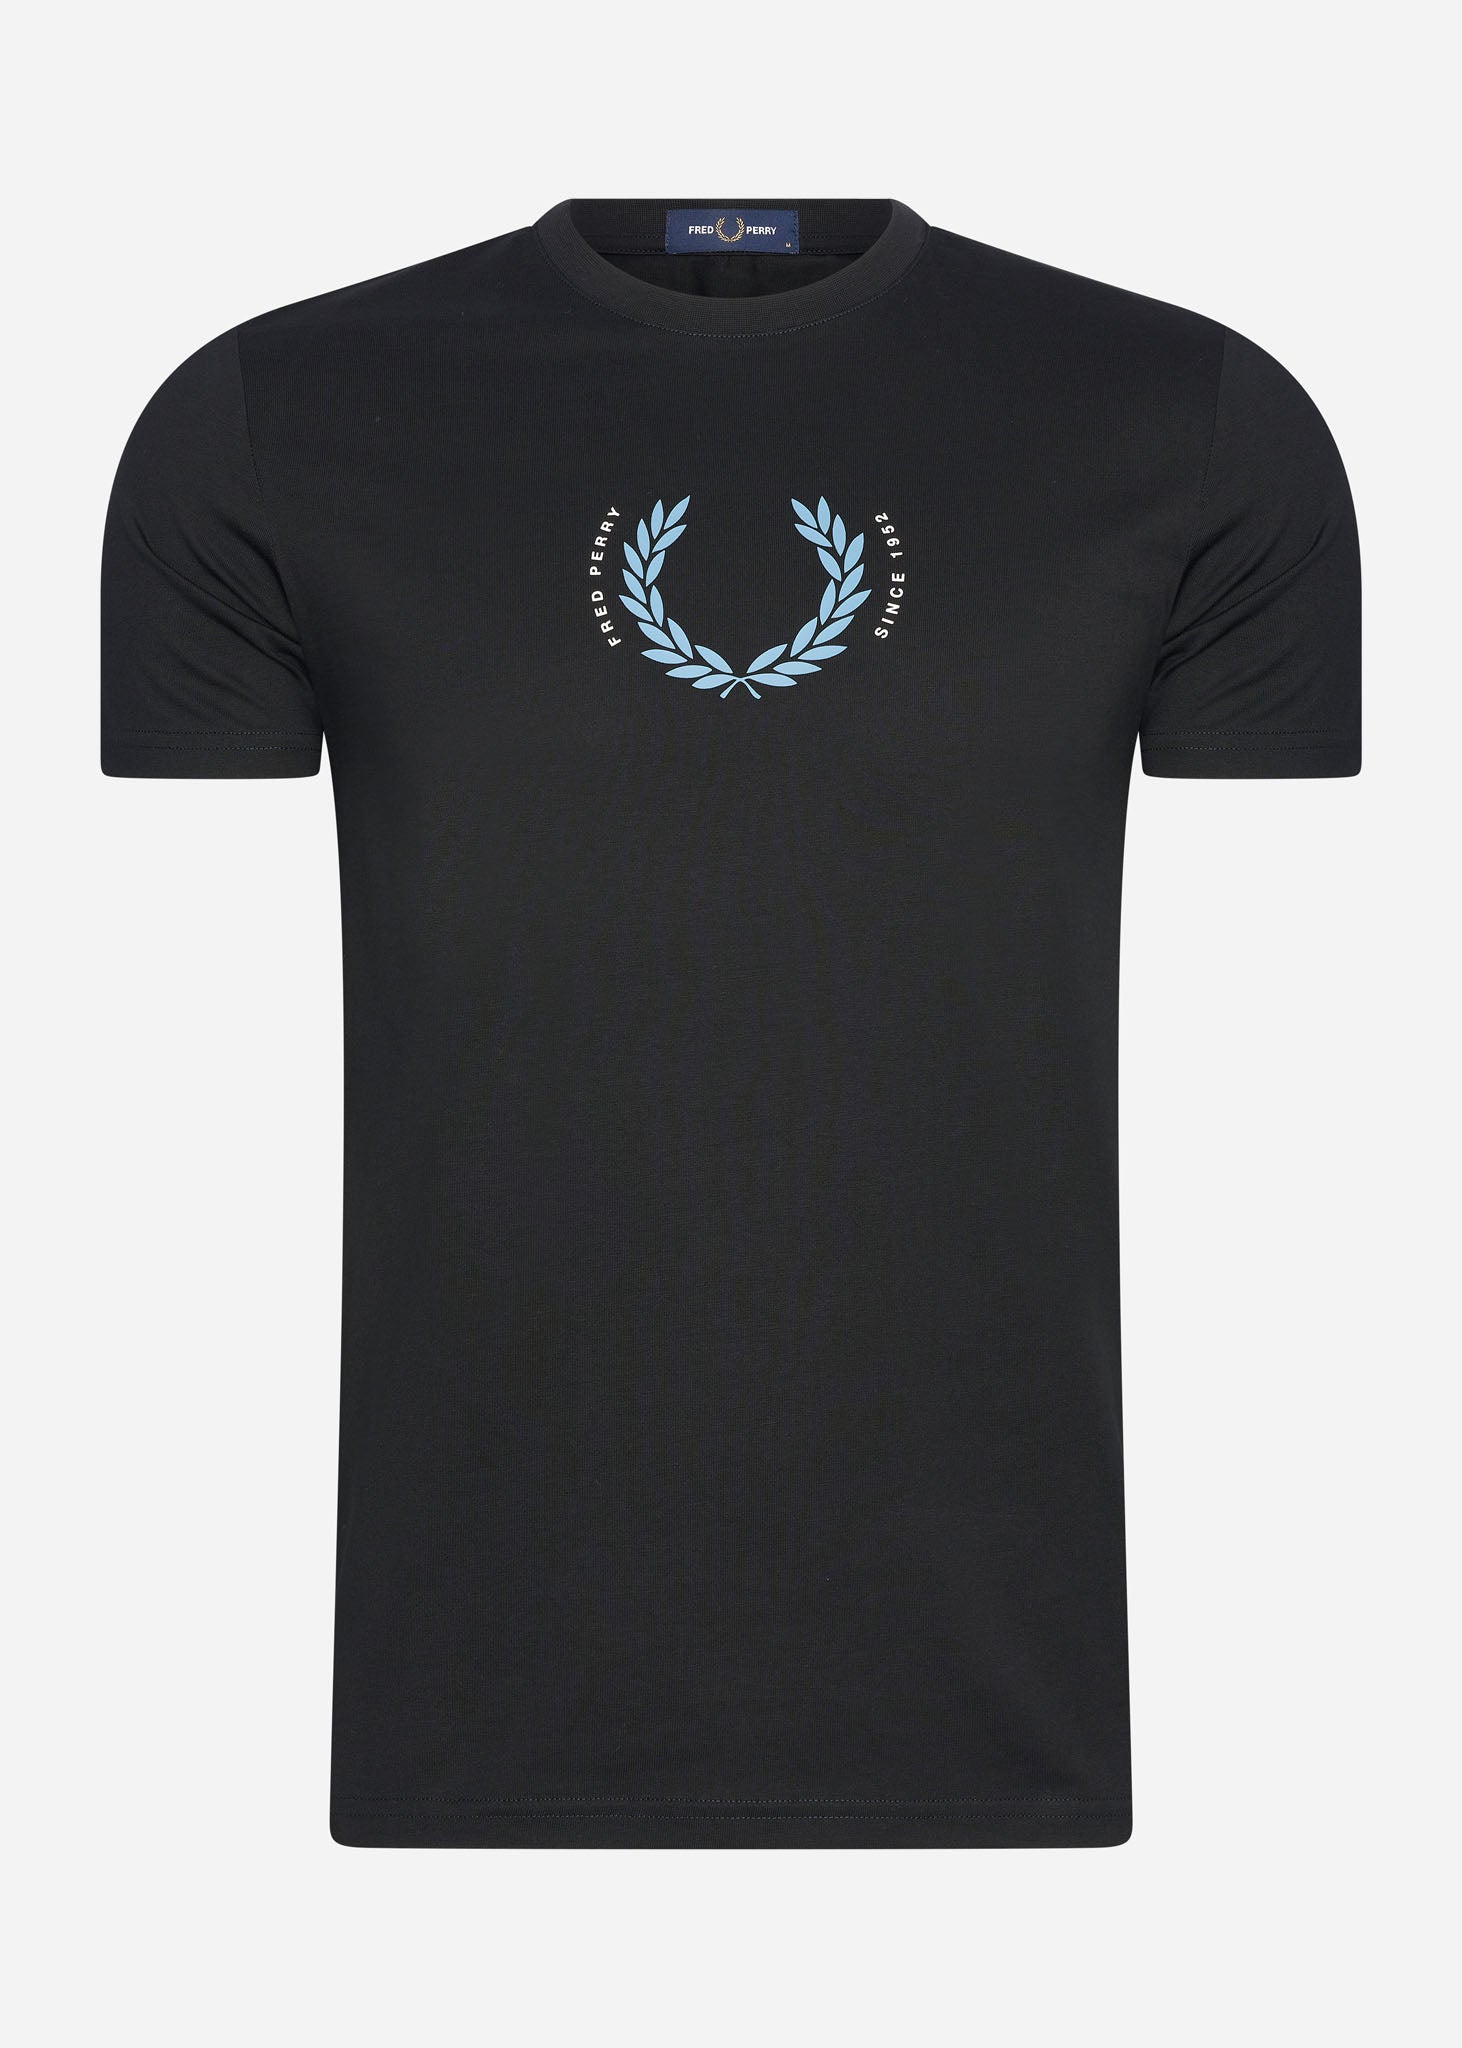 Fred Perry T-shirts  Laurel wreath t-shirt - black 